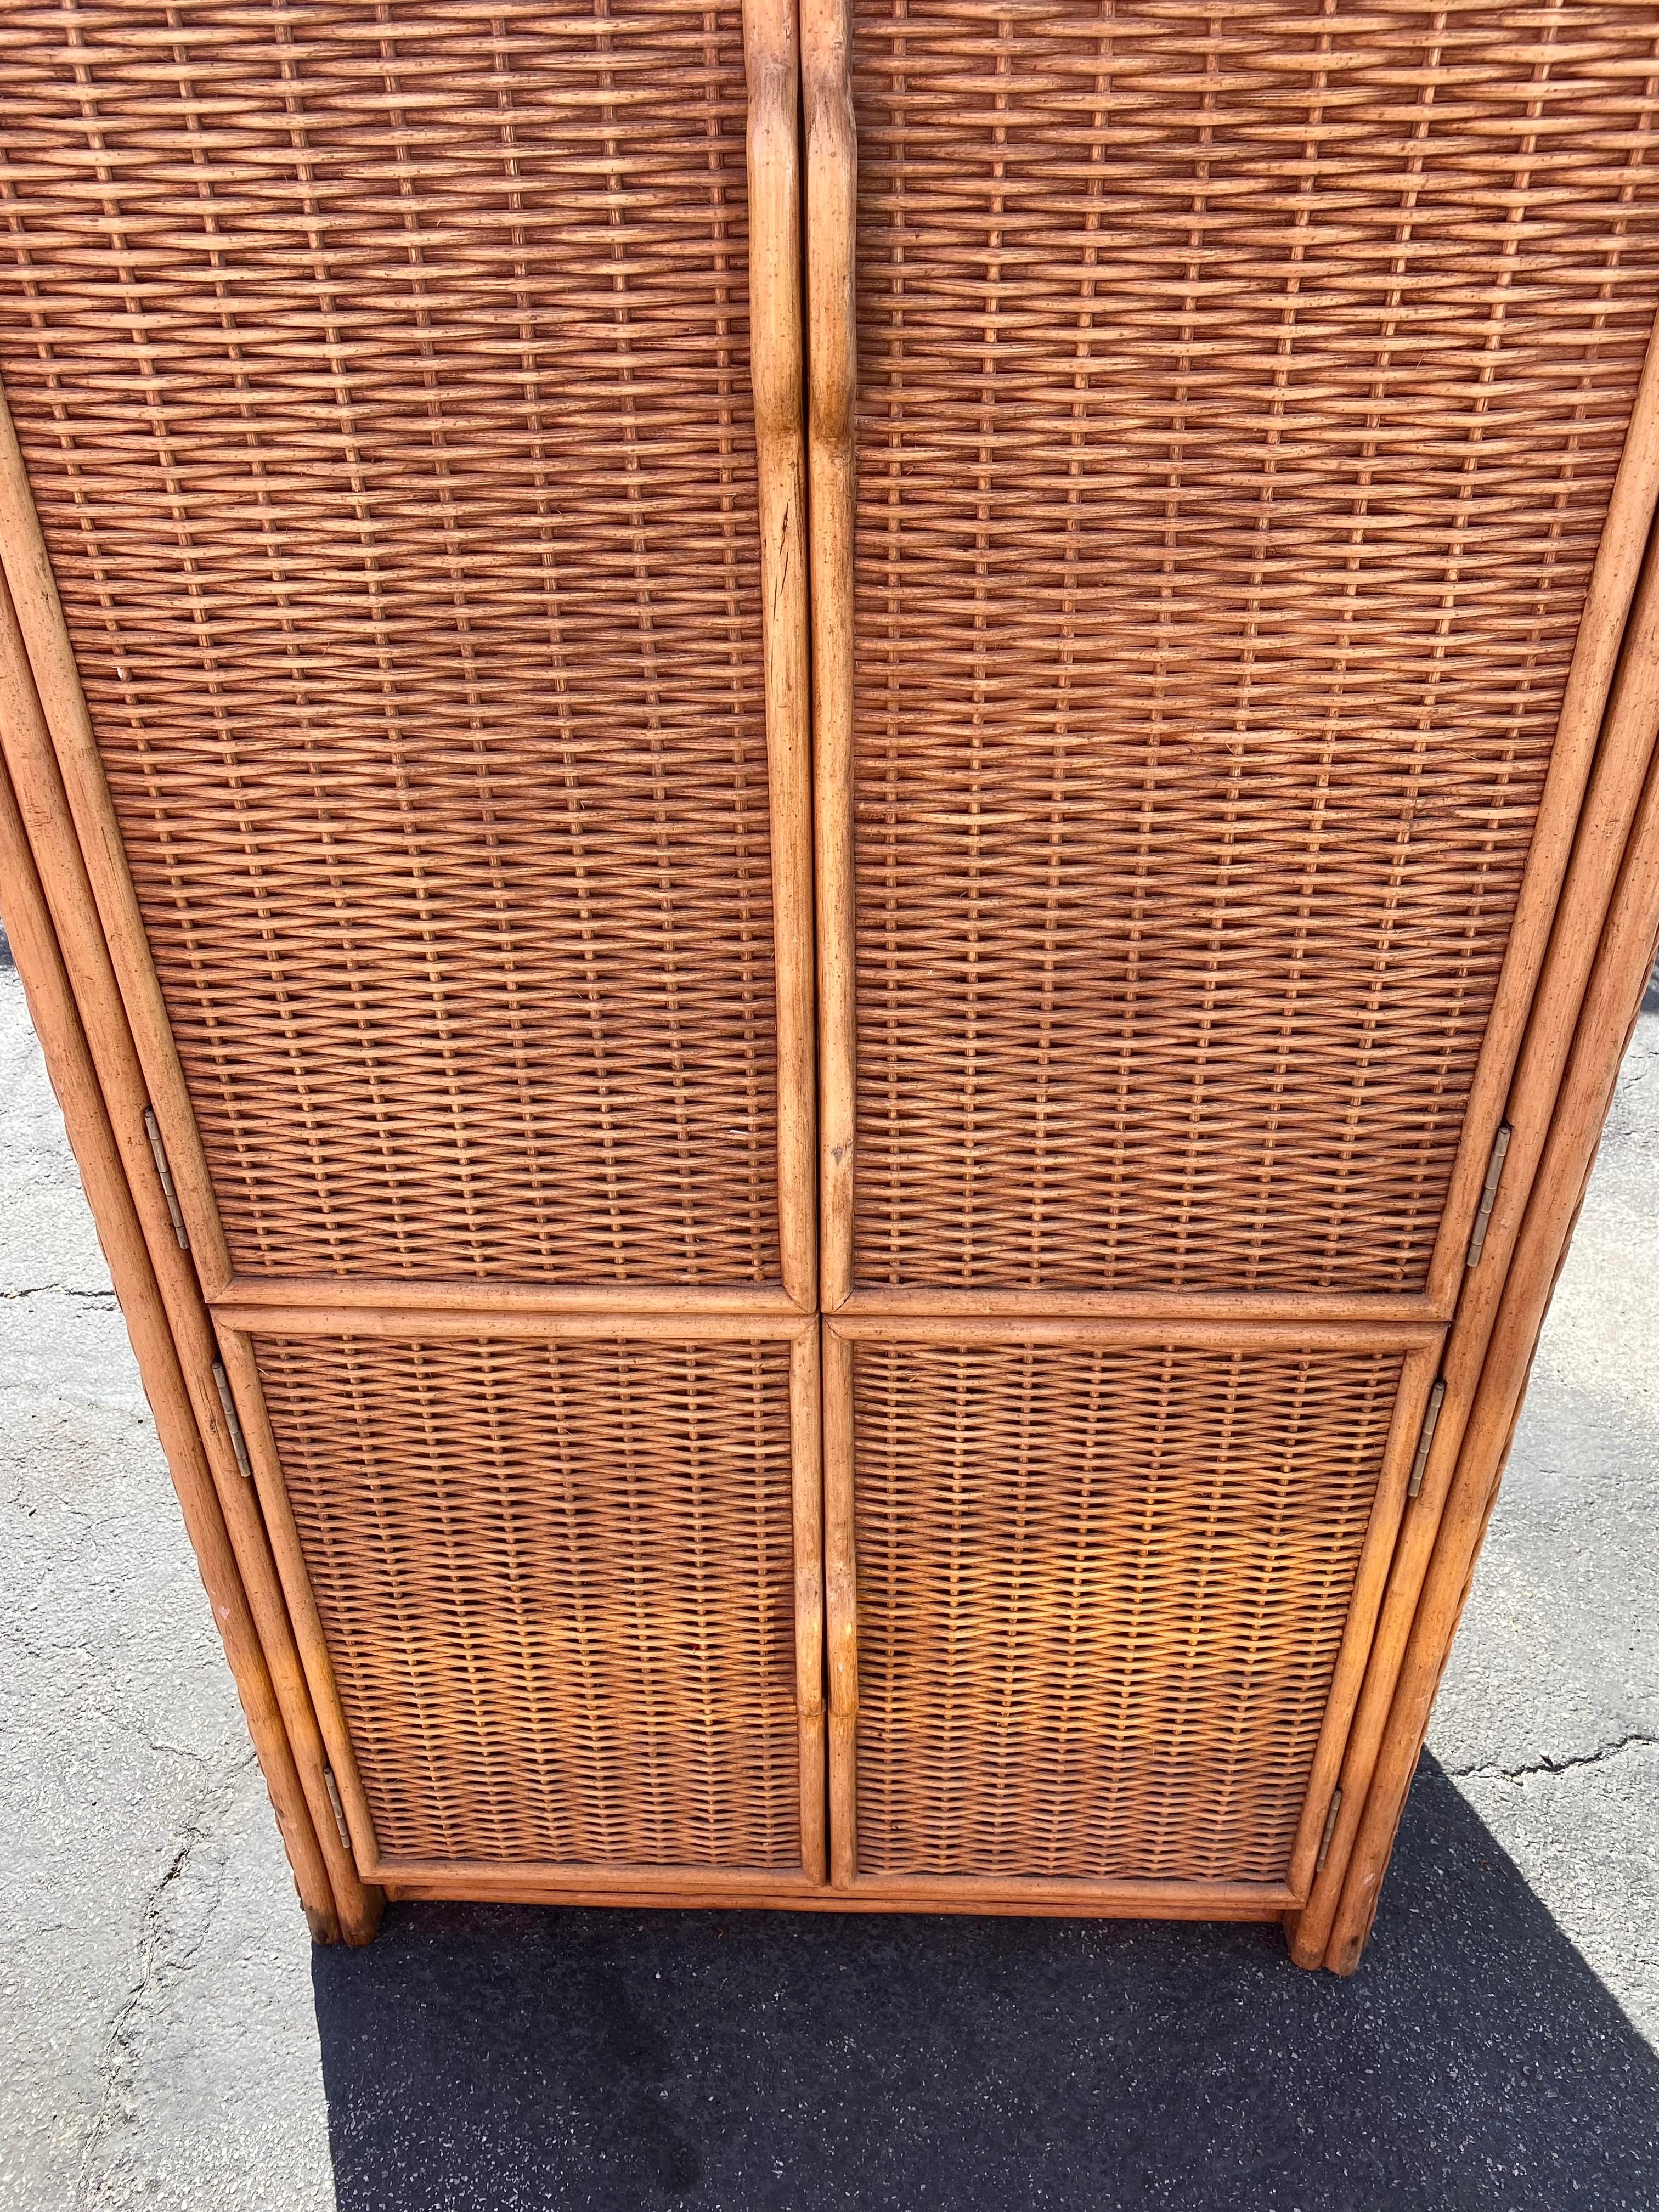 1970s Rattan Arch Armoire Wardrobe Storage Cabinet In Good Condition For Sale In Fort Lauderdale, FL